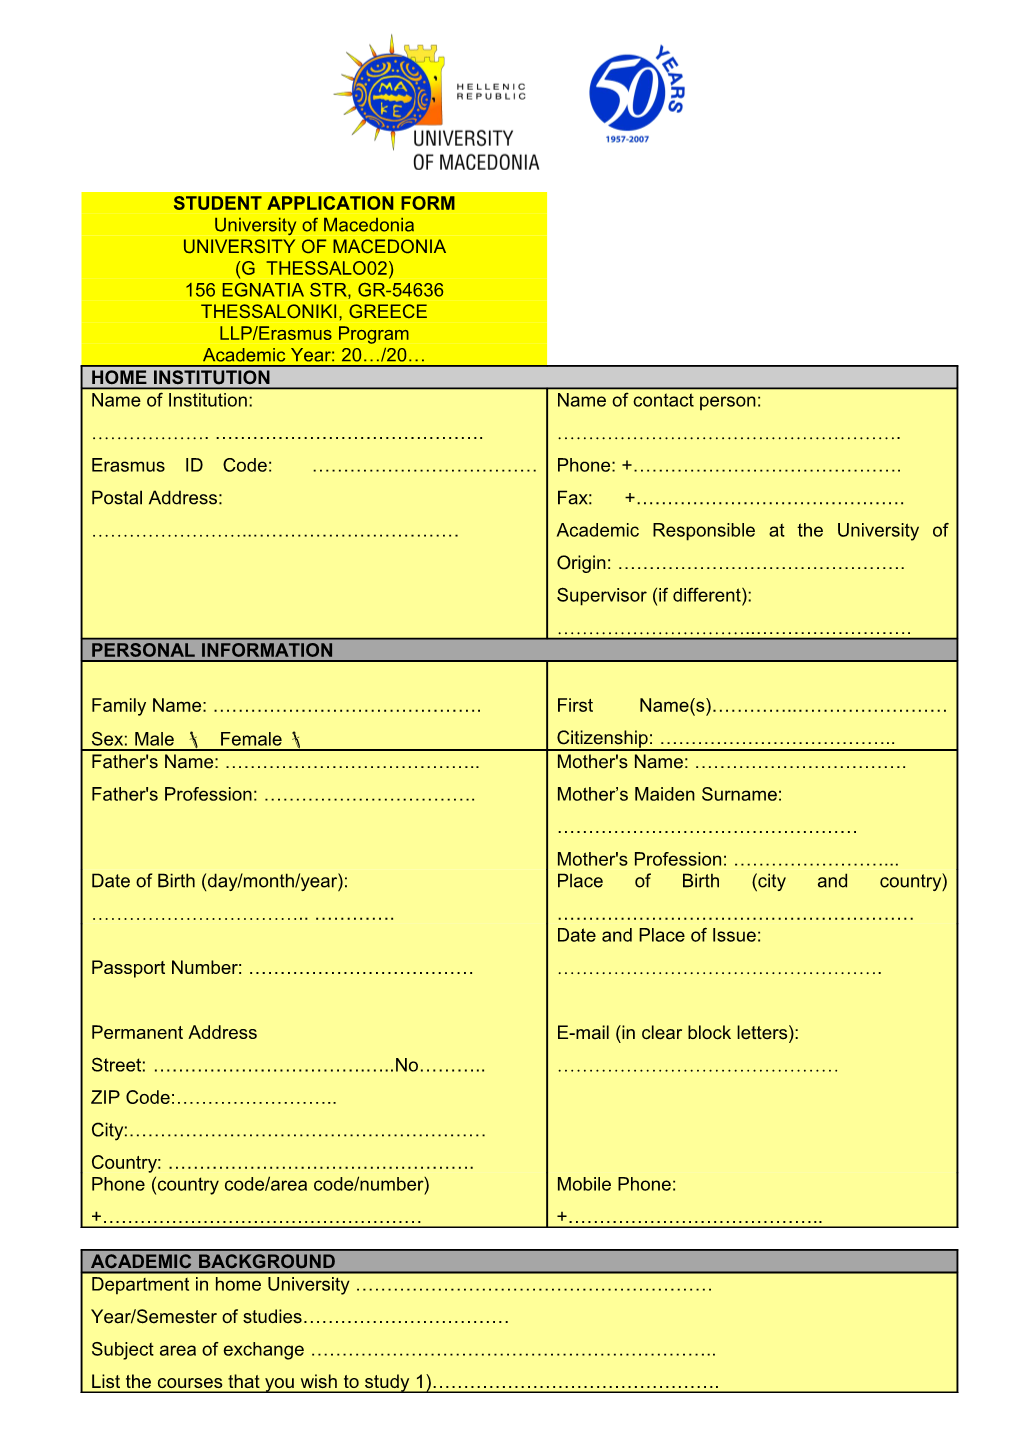 Student Application Form s3